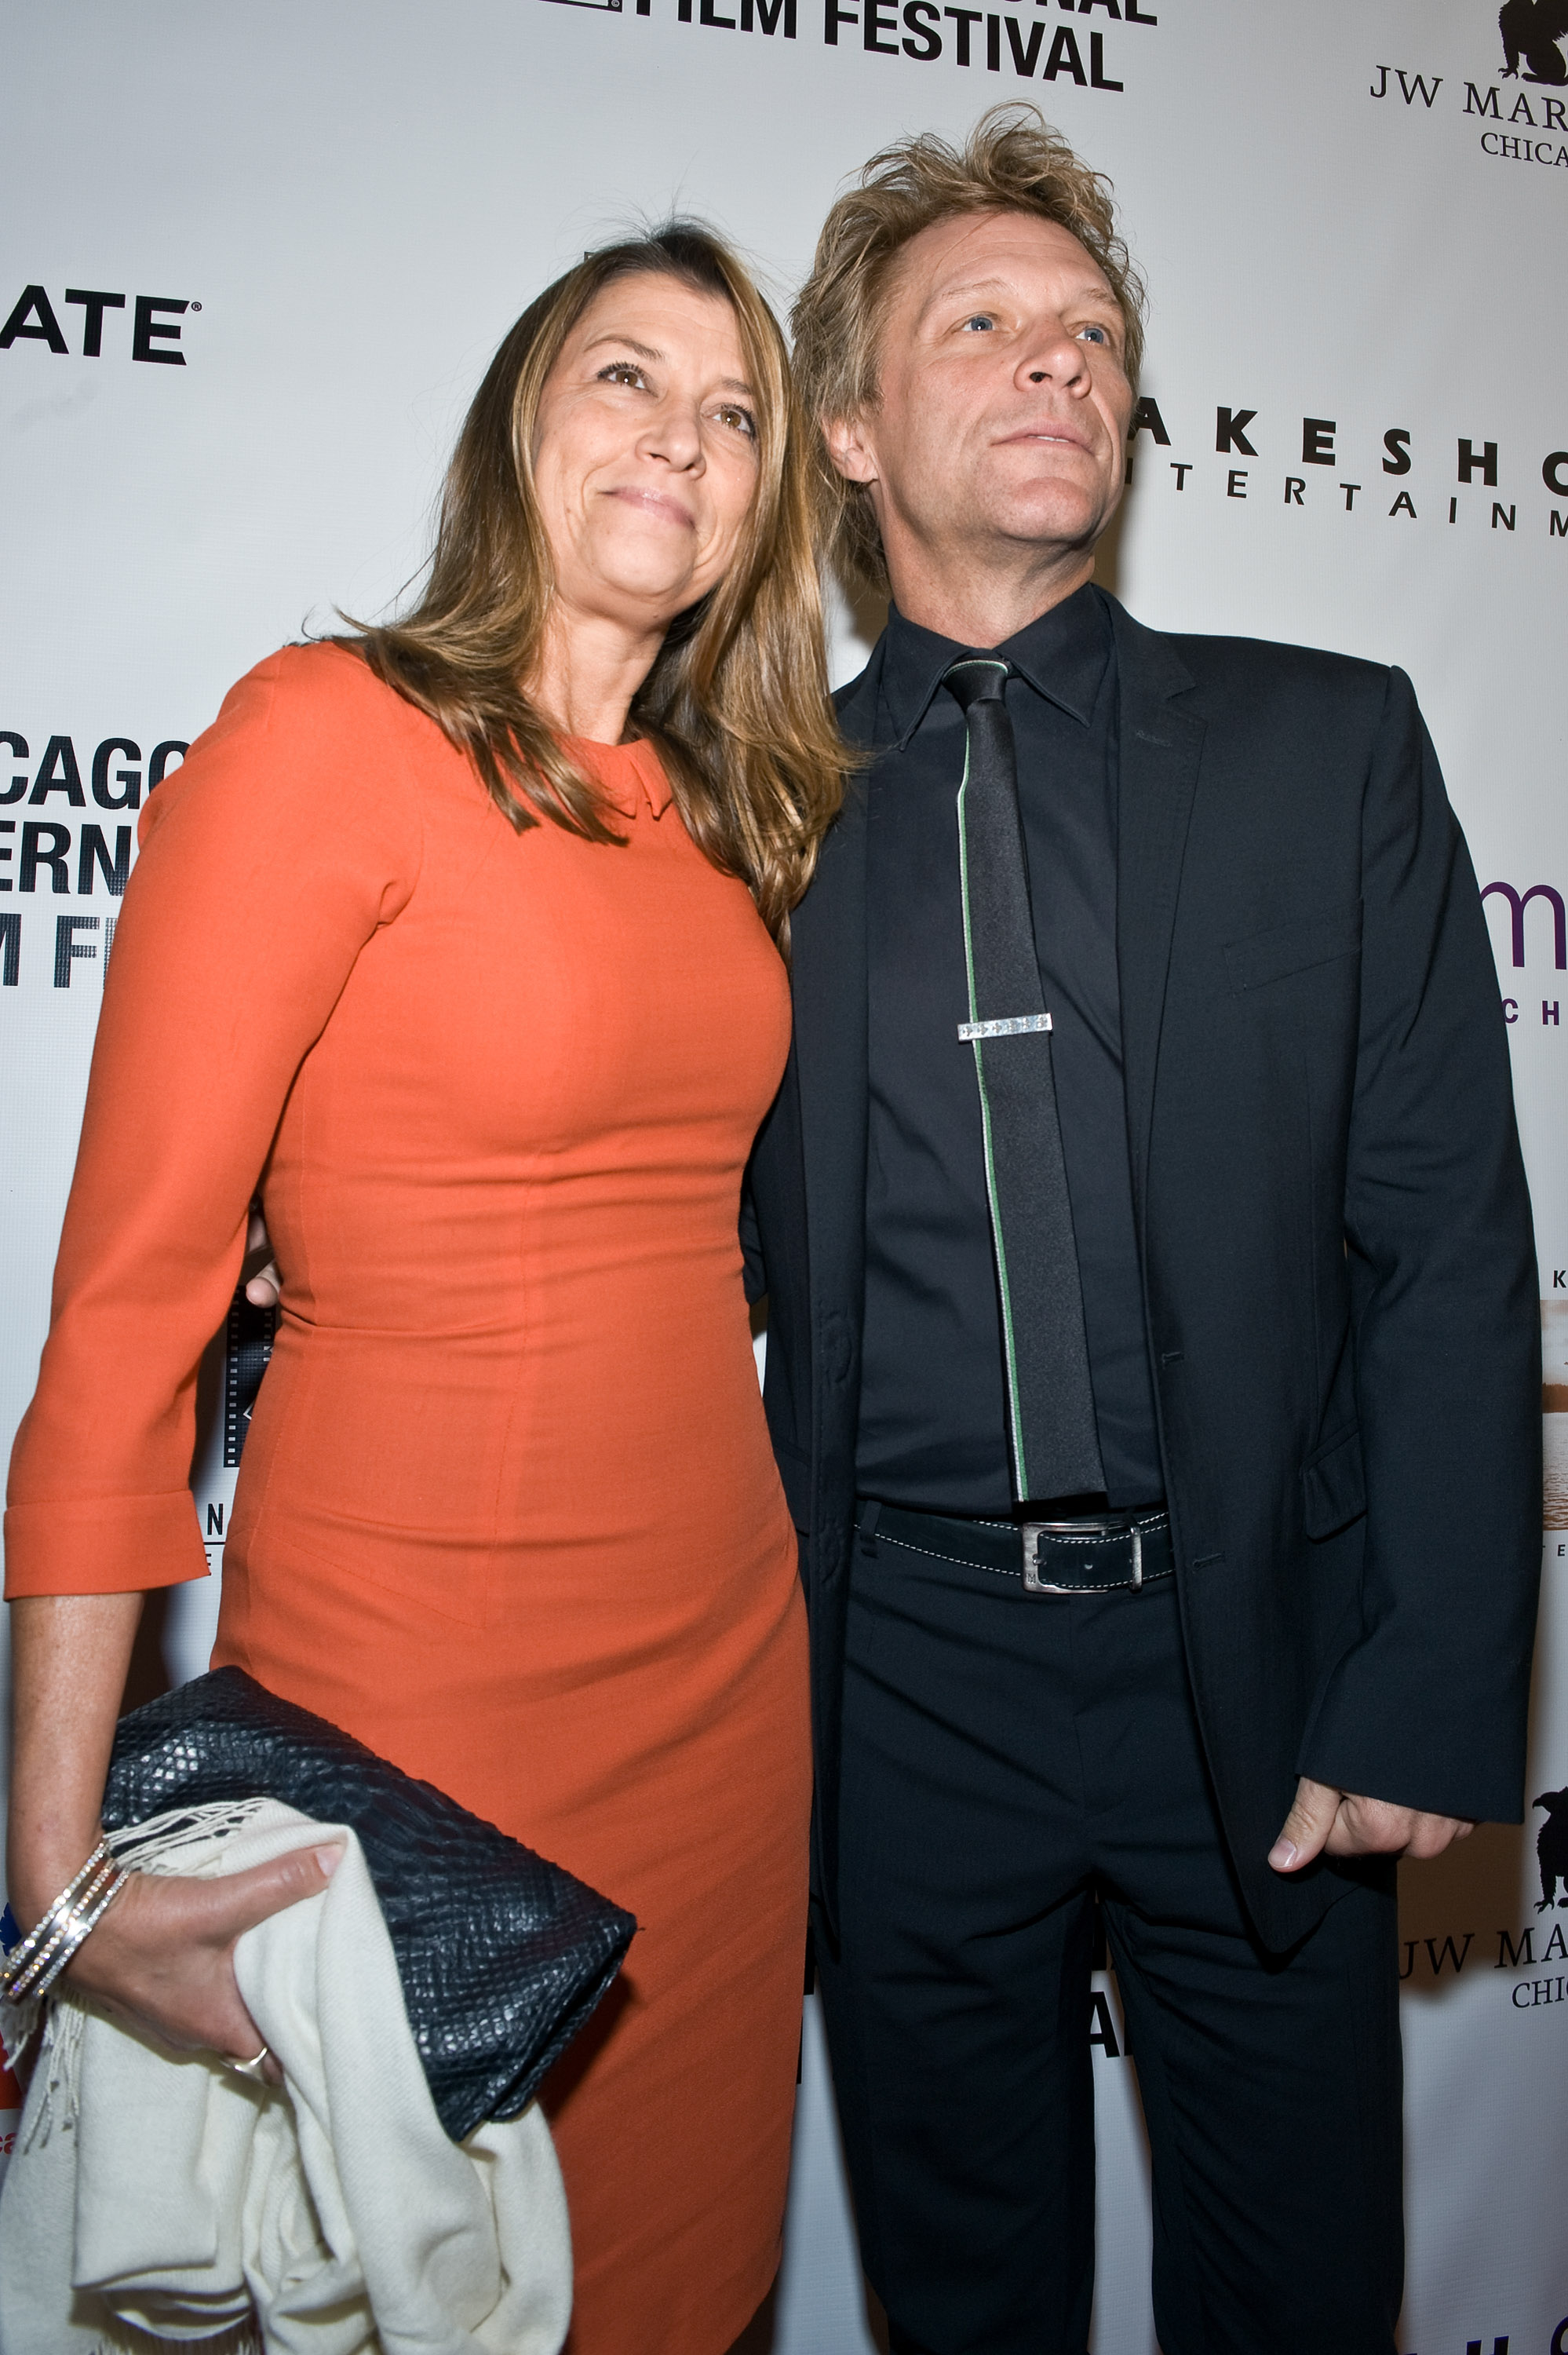 Jon Bongiovi and Dorothea Bongiovi during the "Stand Up Guys" premiere at the Harris Theater on October 11, 2012 in Chicago, Illinois. | Source: Getty Images